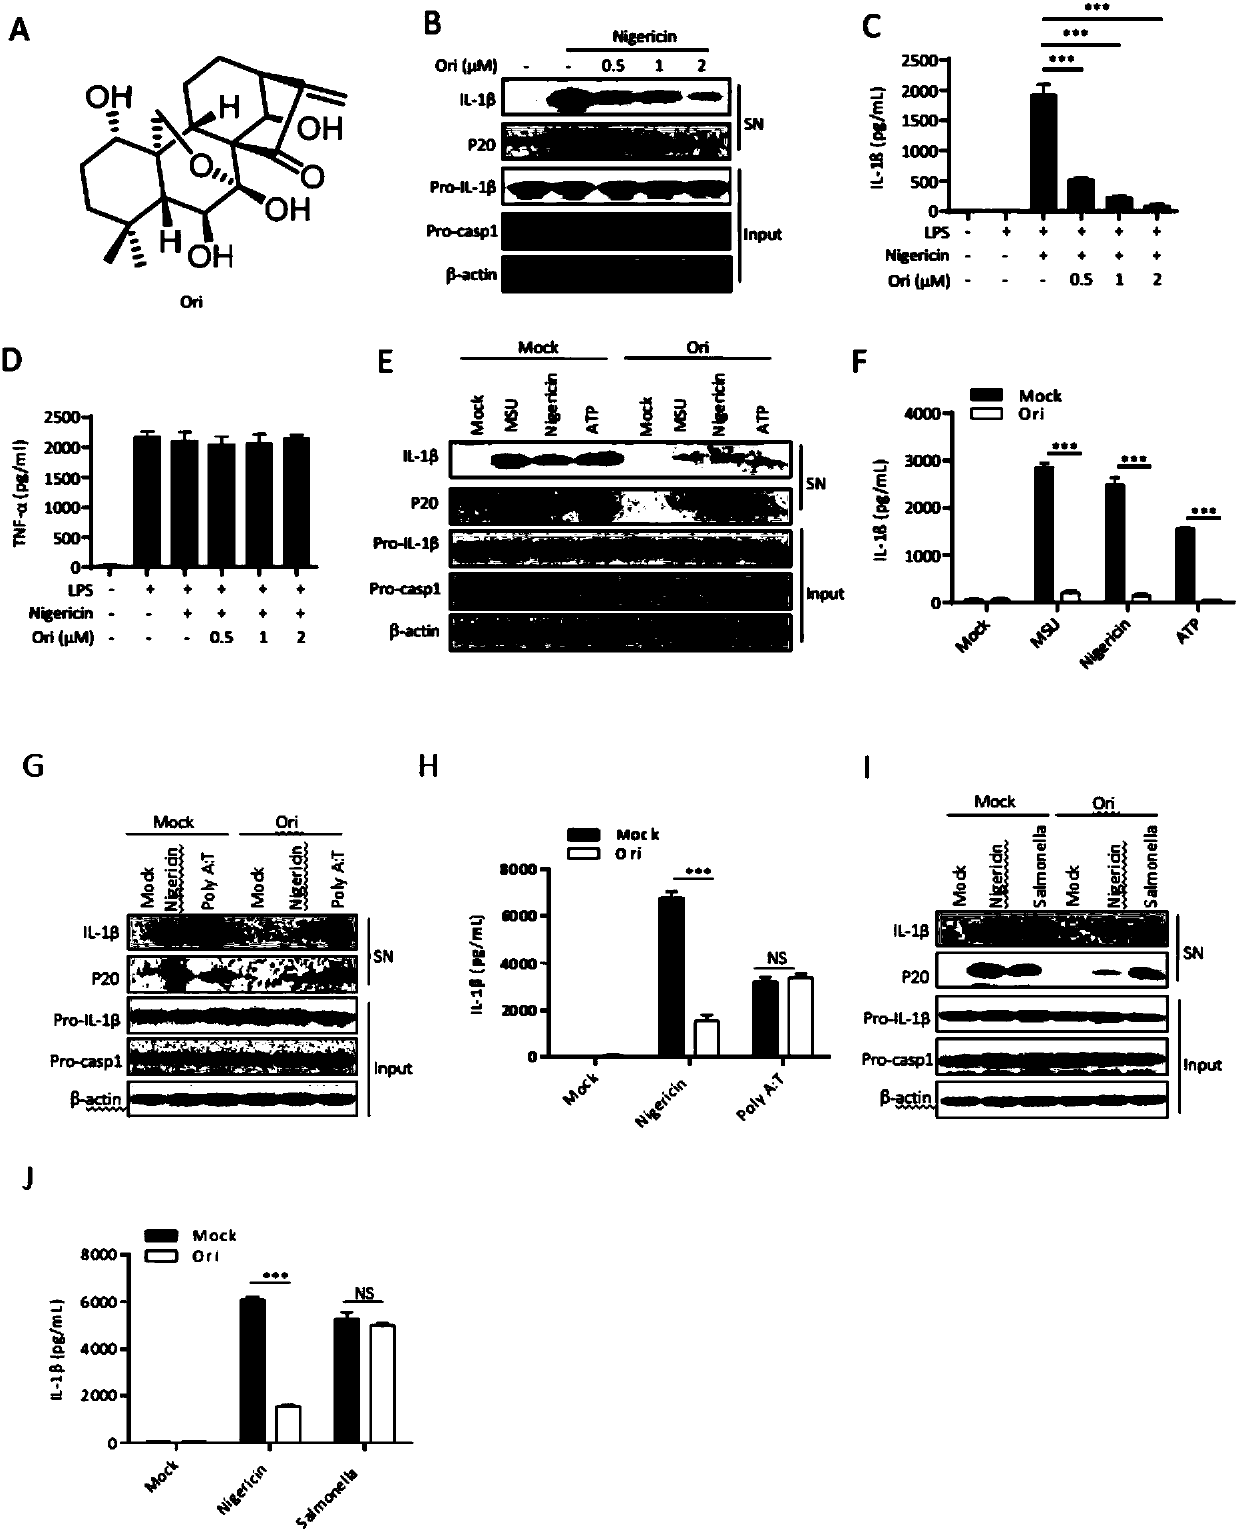 Application of oridonin in preparing drugs for preventing or treating NLRP3 inflammasome-related diseases